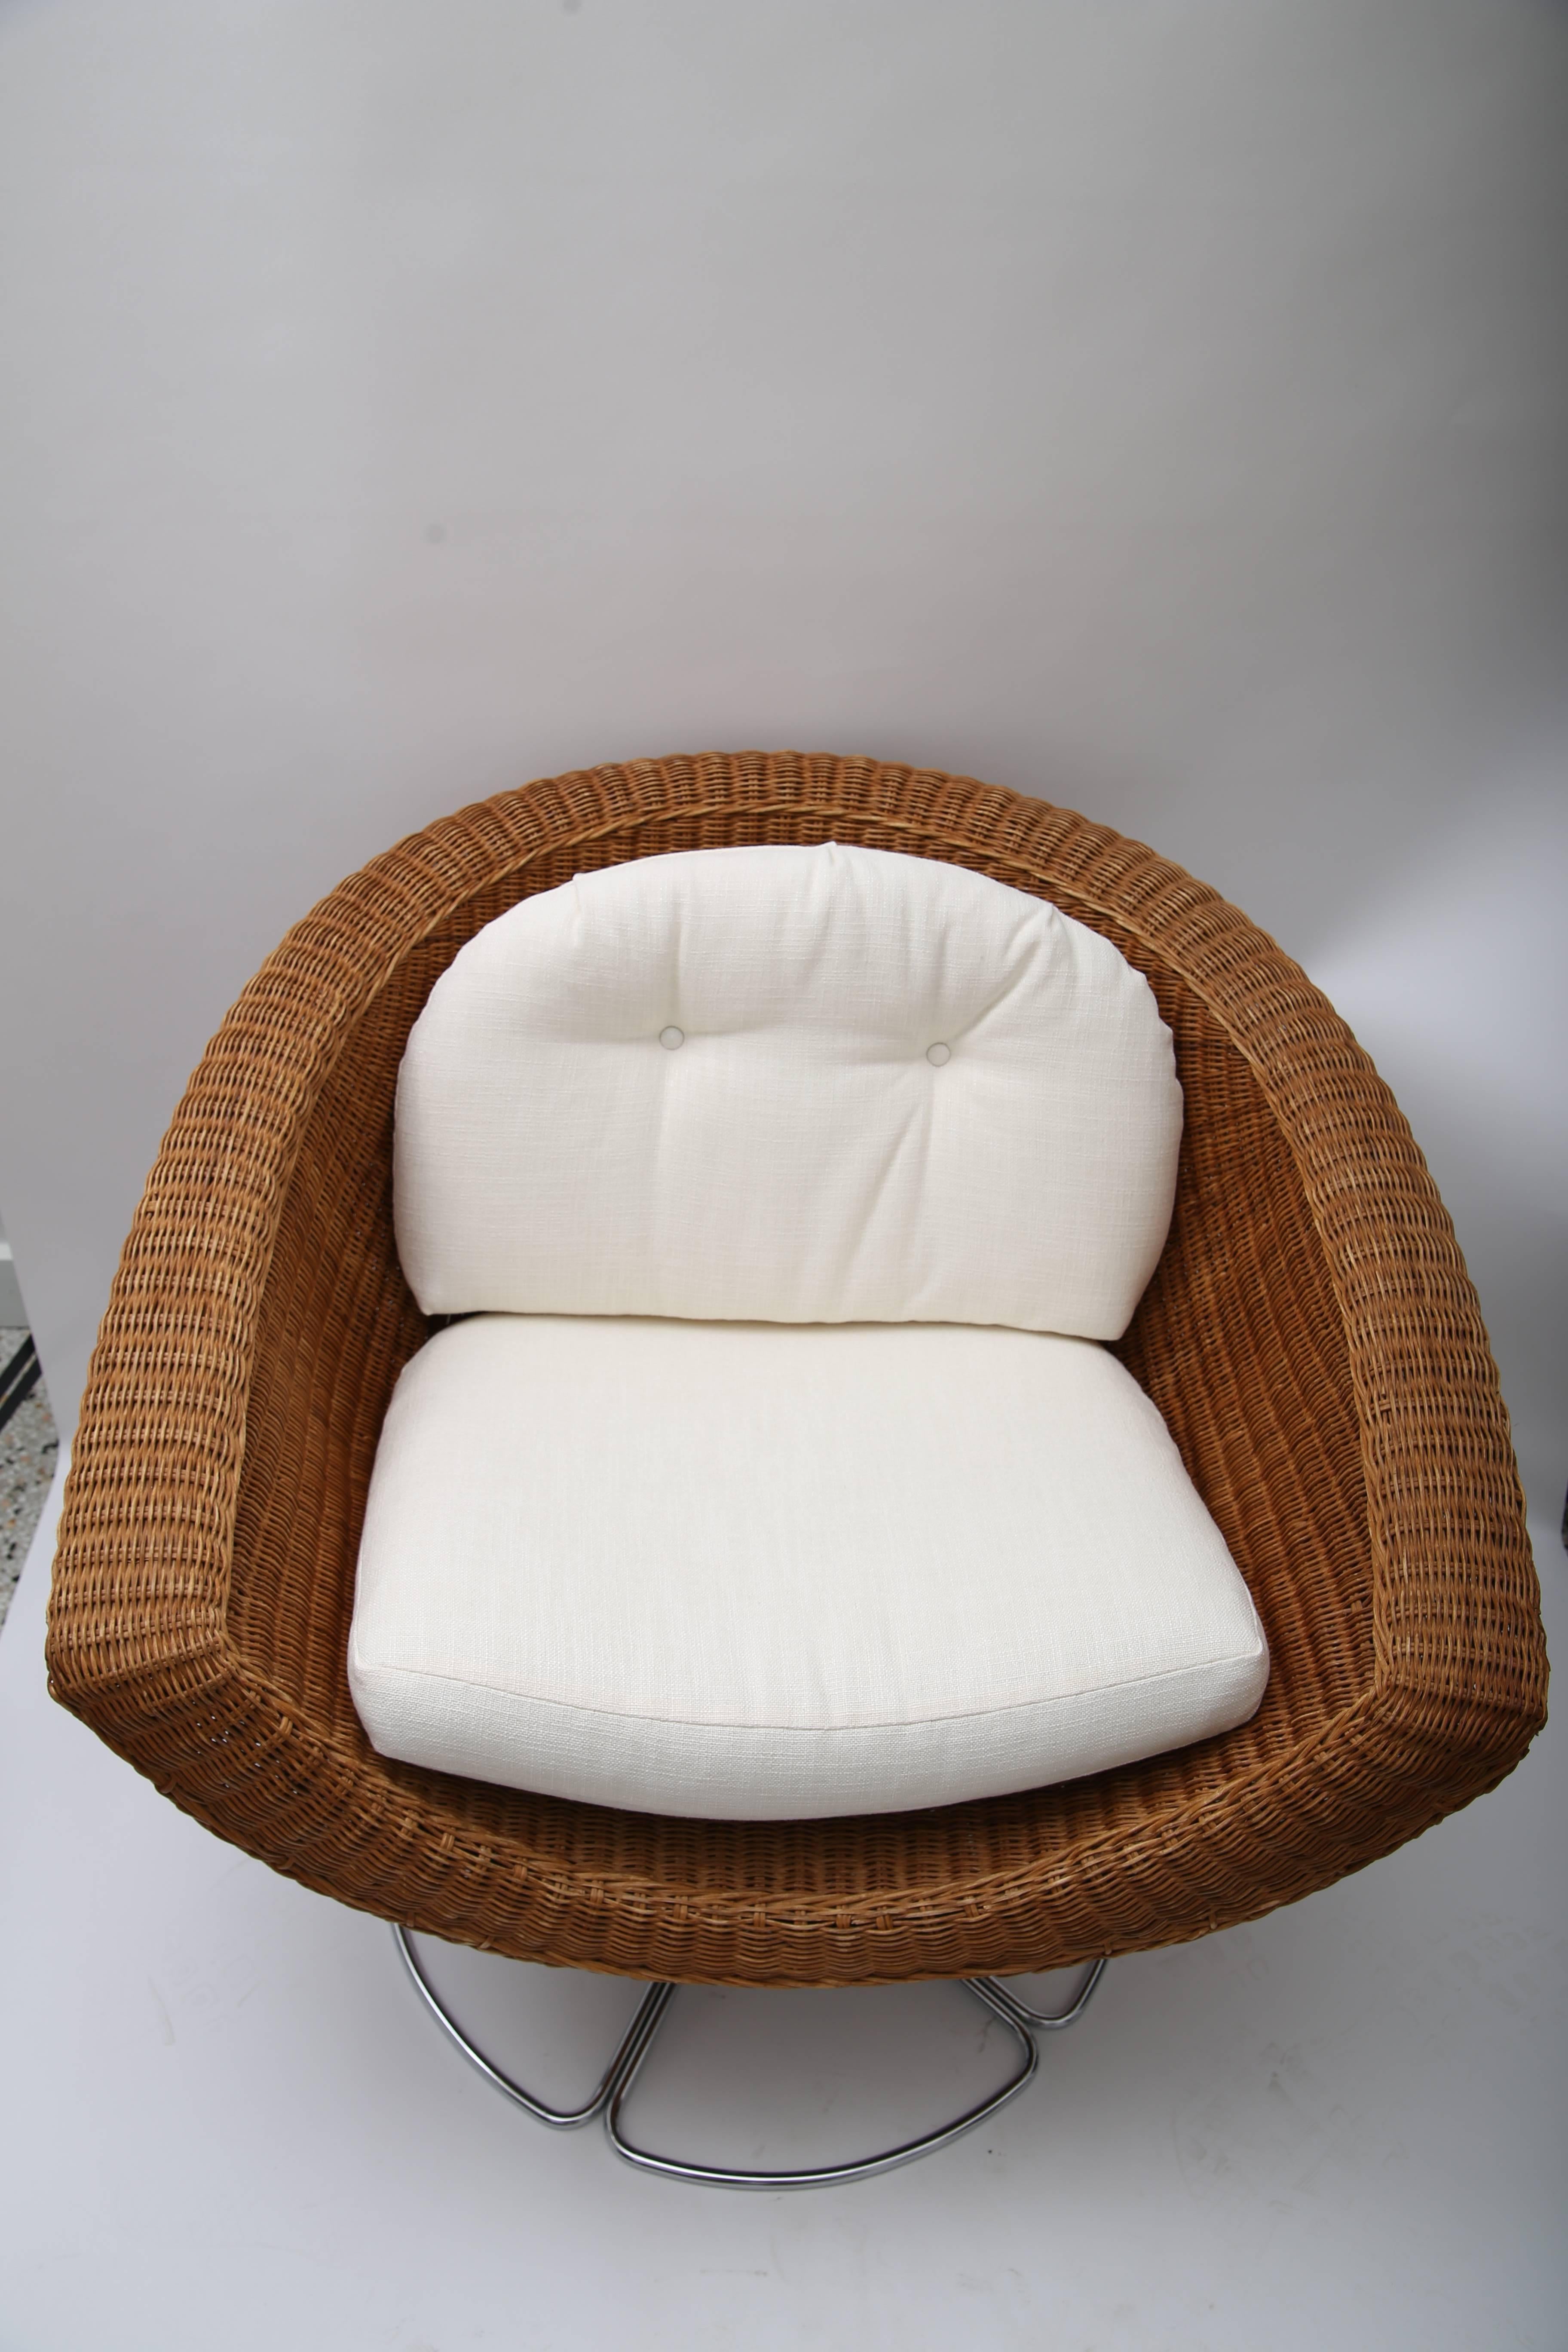 20th Century Pair of Bohemian Swivel Chairs in Woven Wicker and Polished Chrome